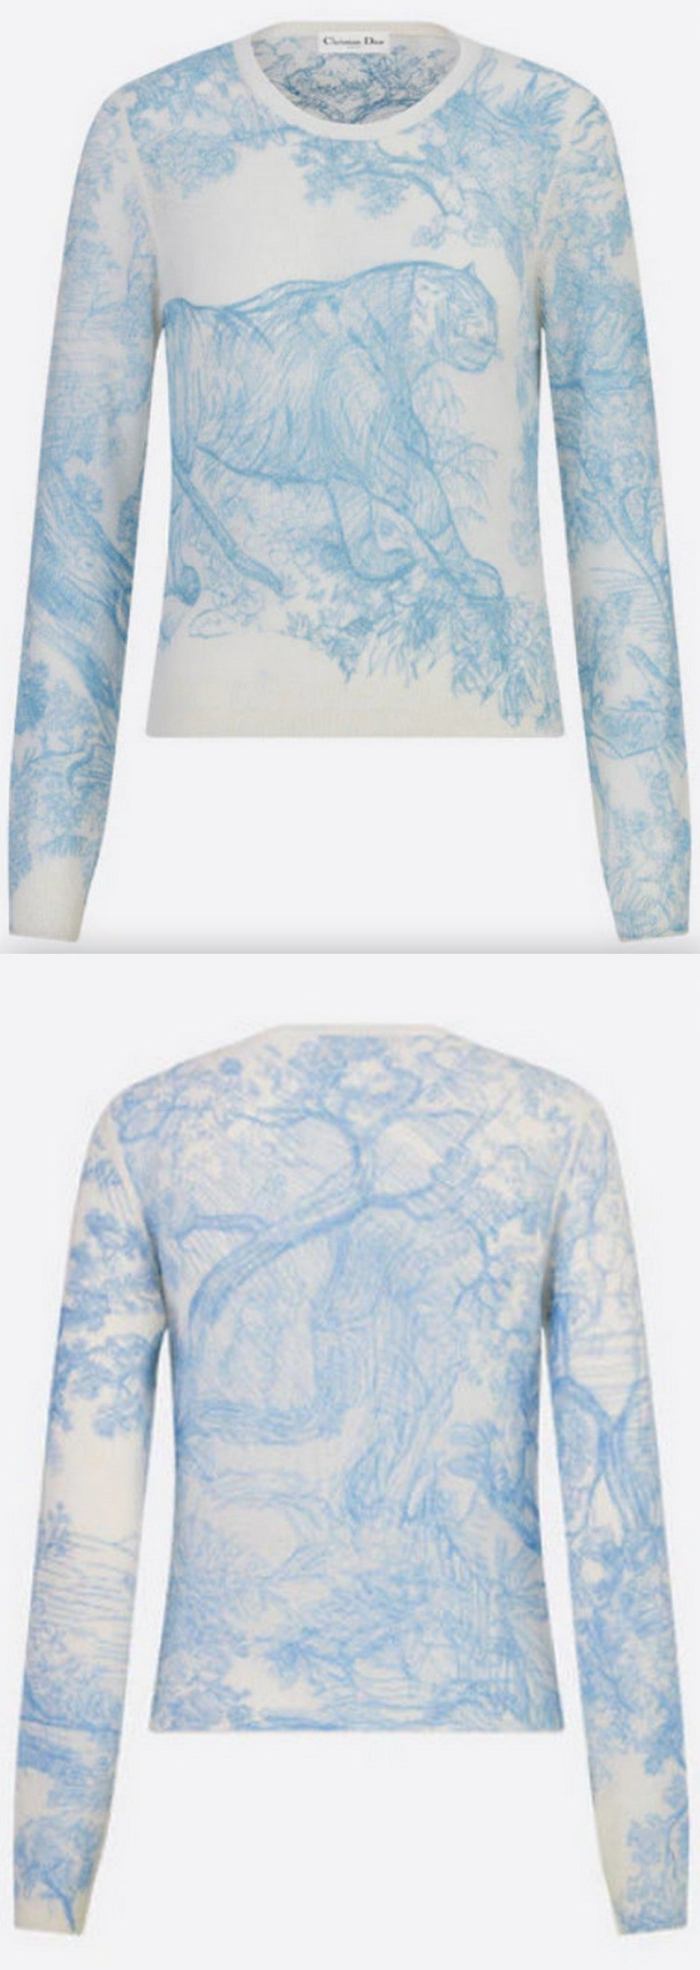 'Chez Moi' Embroidered Technical Cashmere Knit Sweater with Toile de Jouy Motif, Cornflower Blue